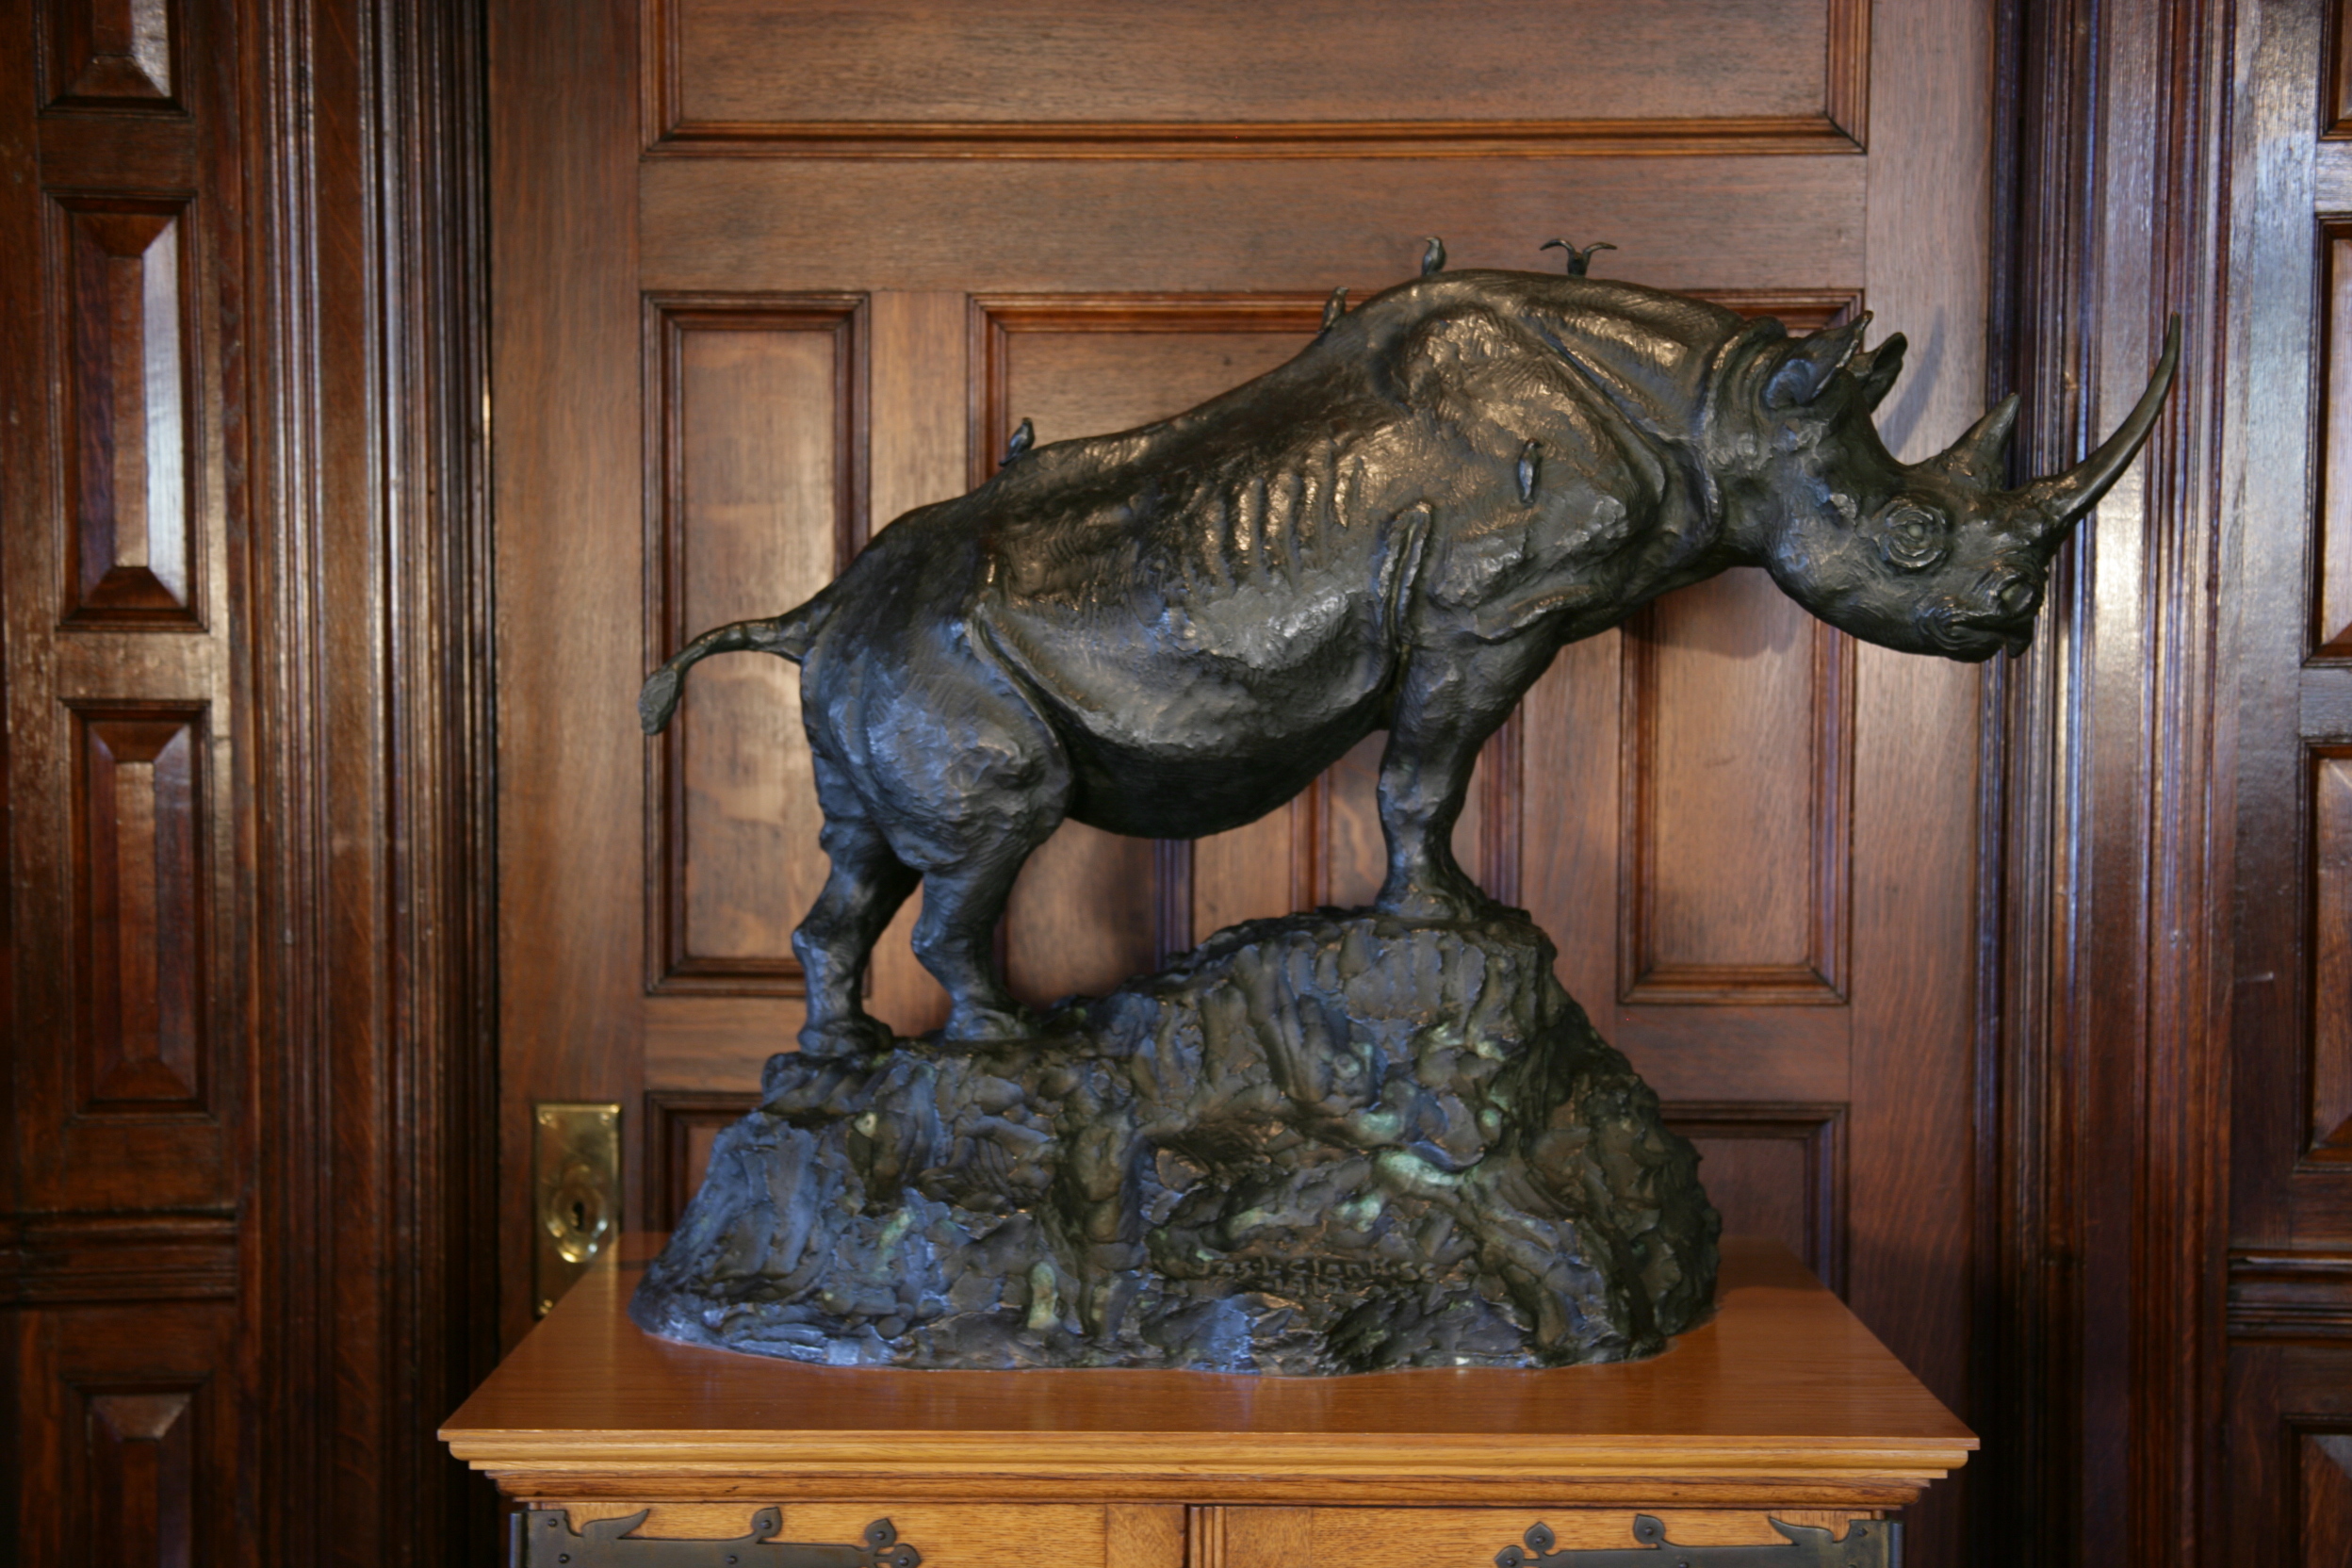 A large bronze sculpture of a rhinoceros on a peak, with small birds sitting on its spine. 